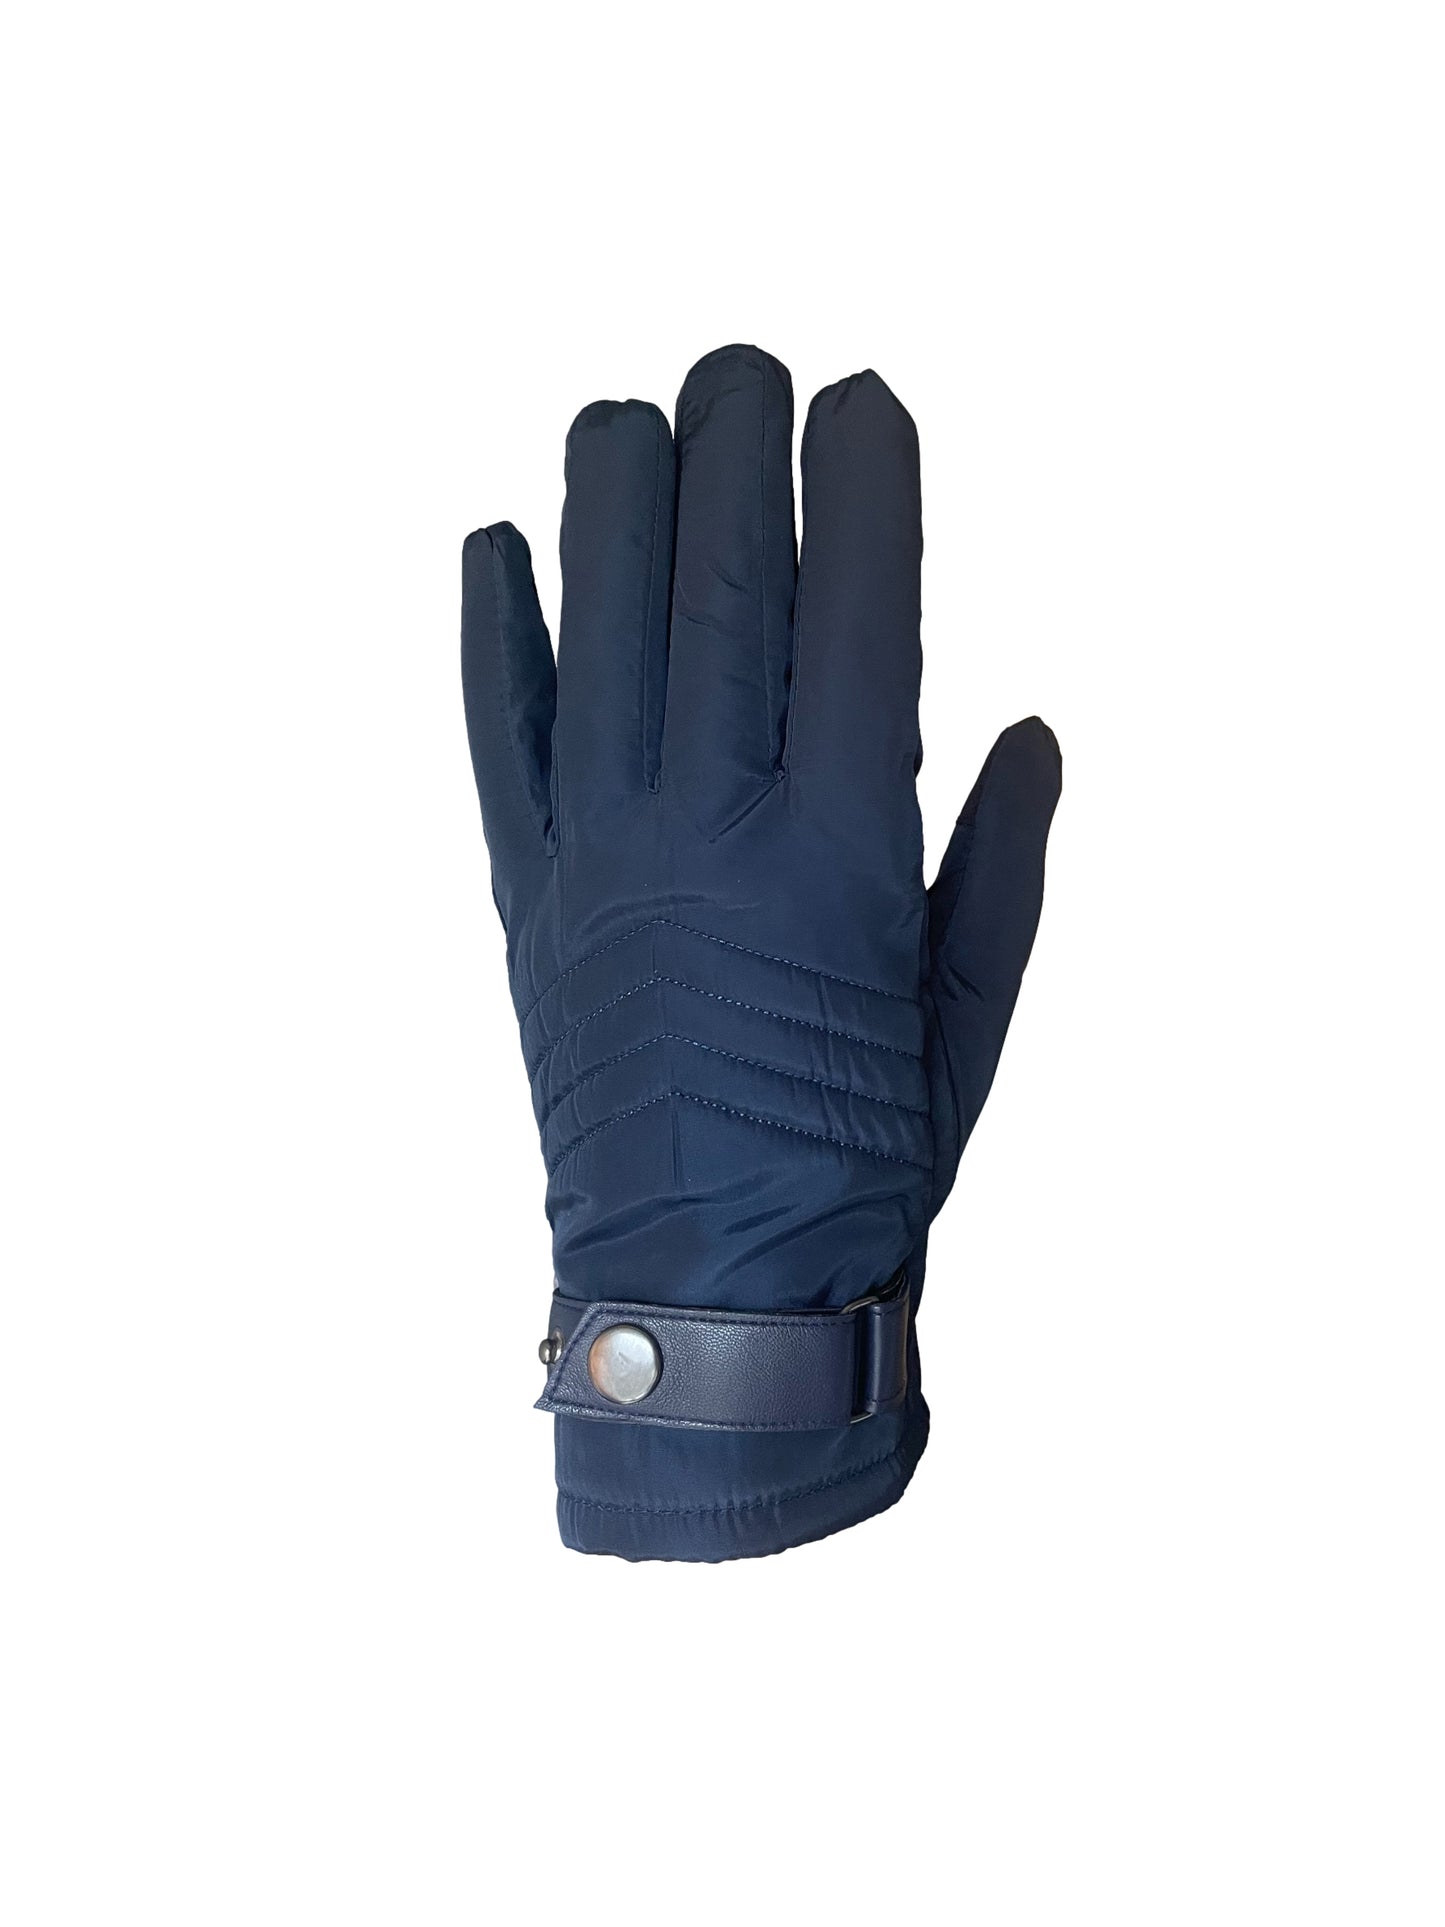 Nylon Glove Quilted Back Polyester Lined With Adjustable Strap Blue